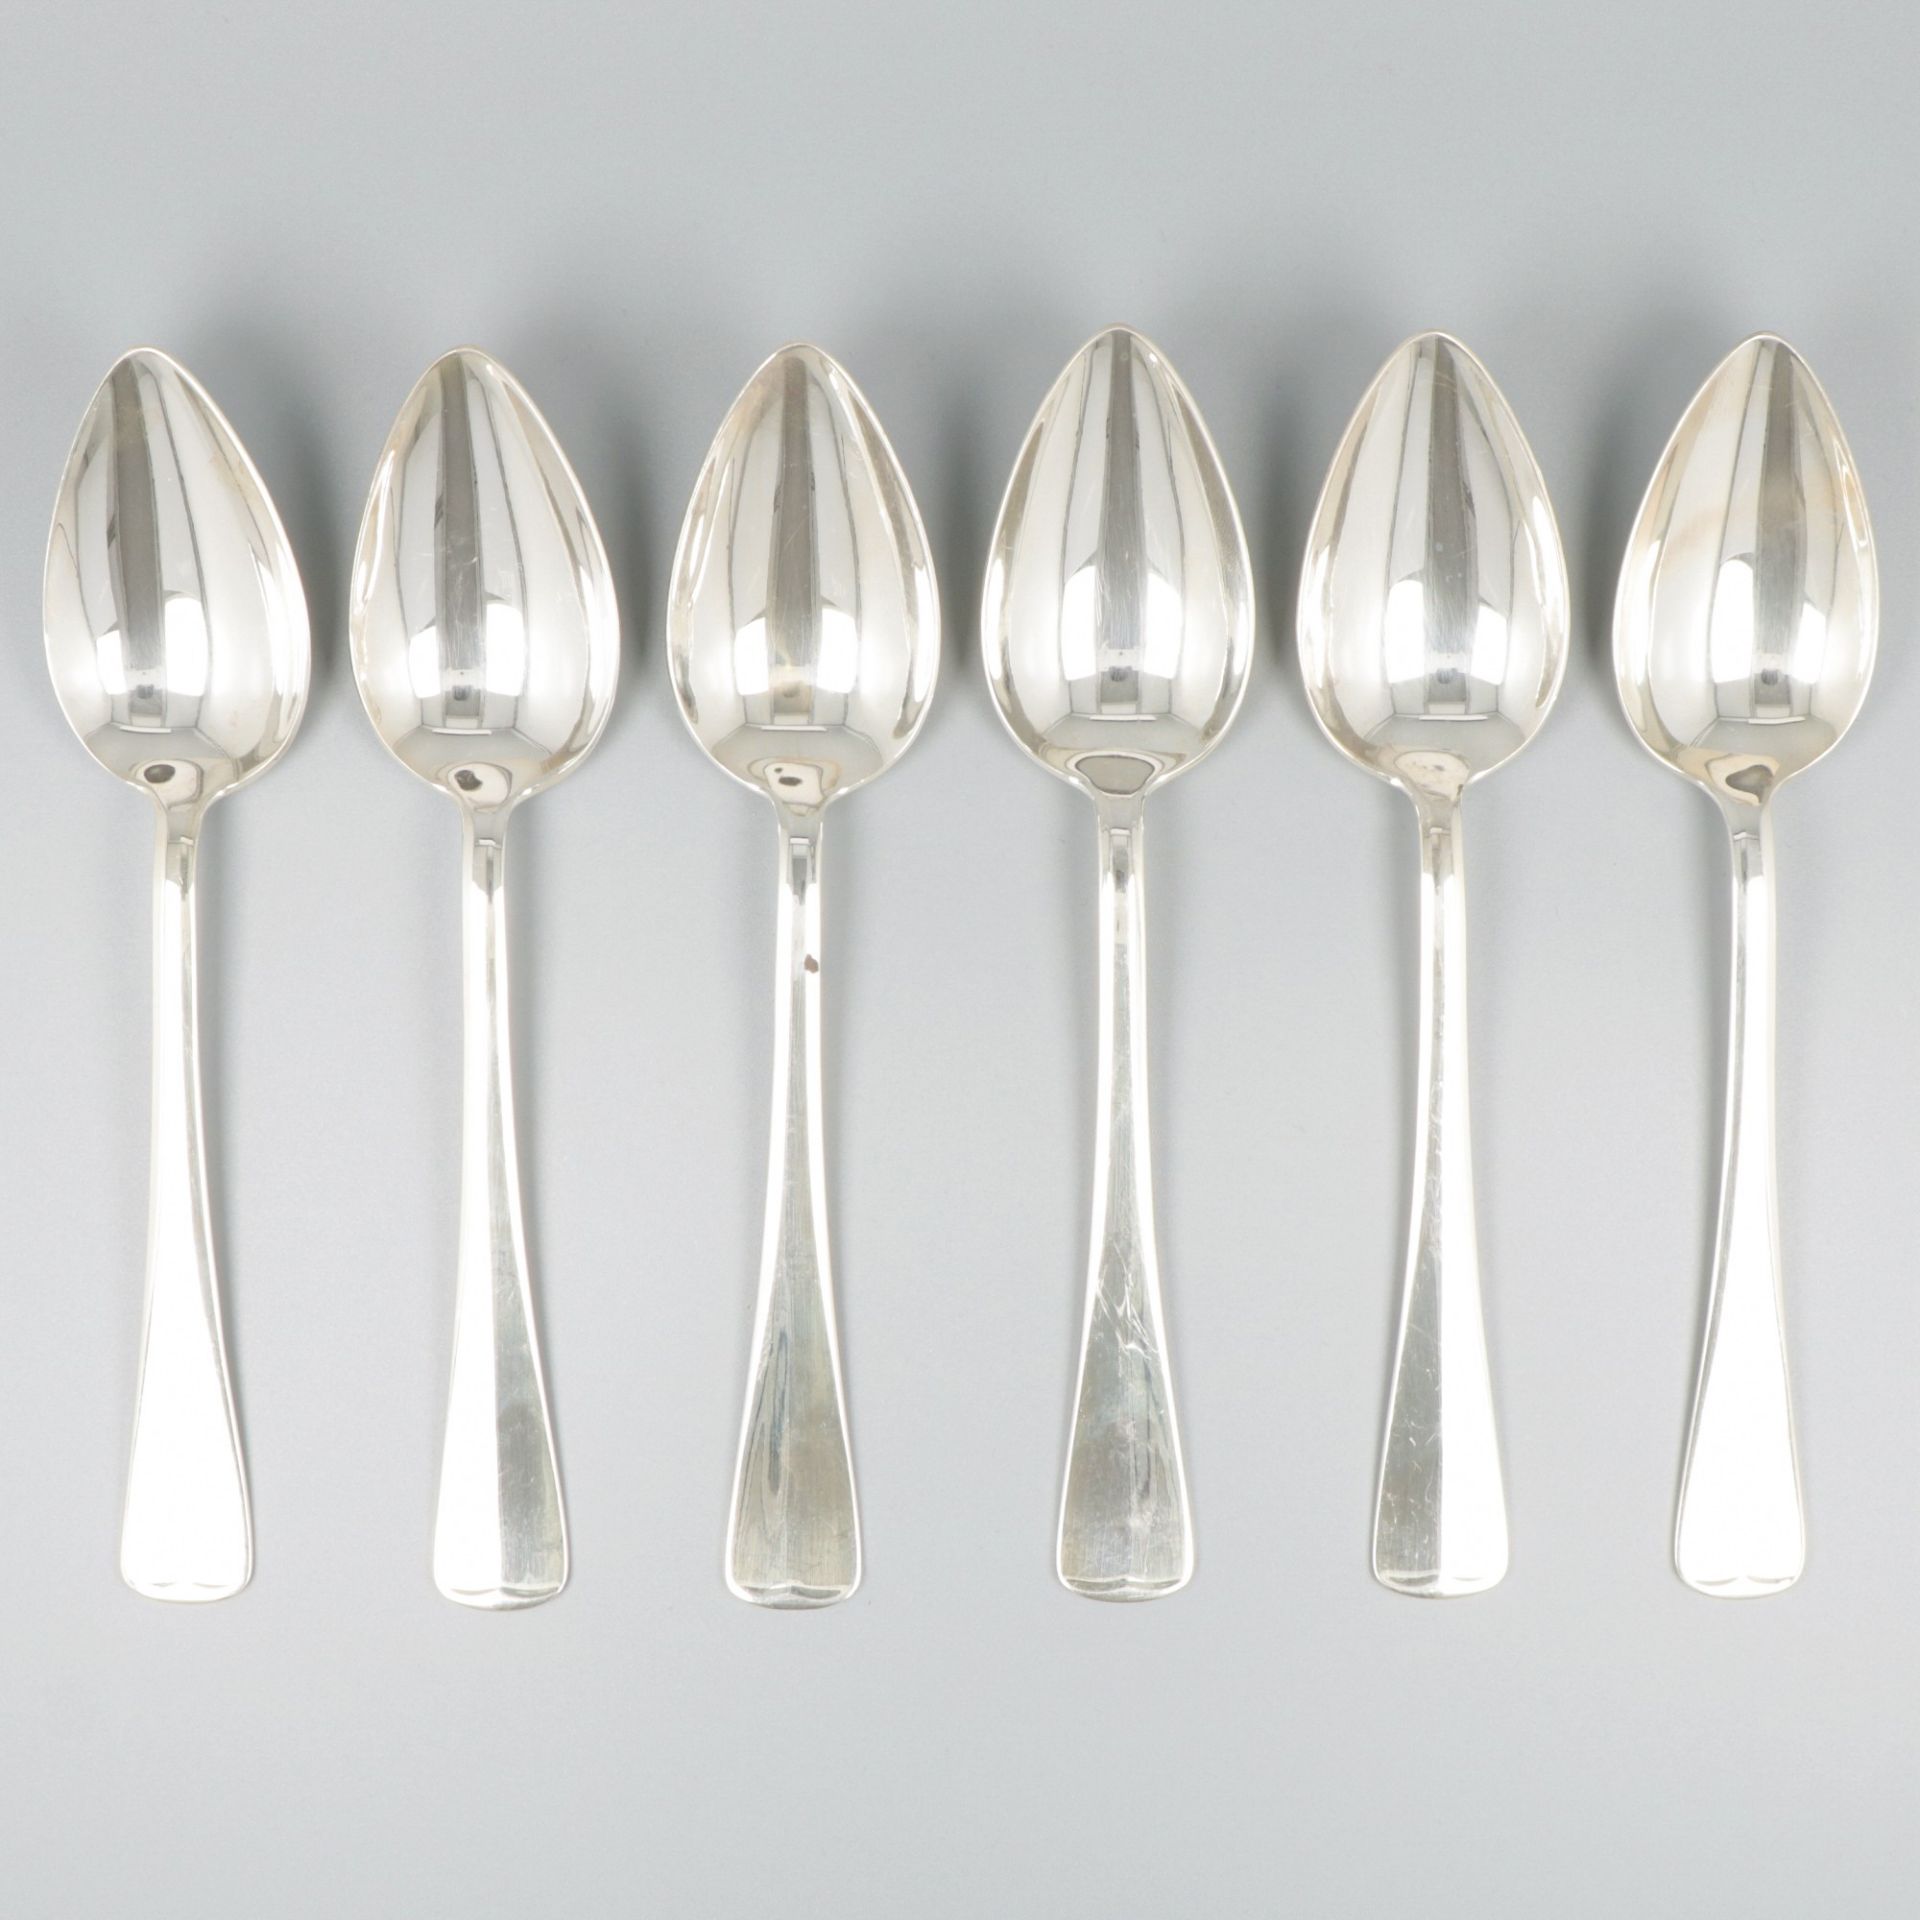 6-piece set dinner spoons "Haags Lofje" silver.